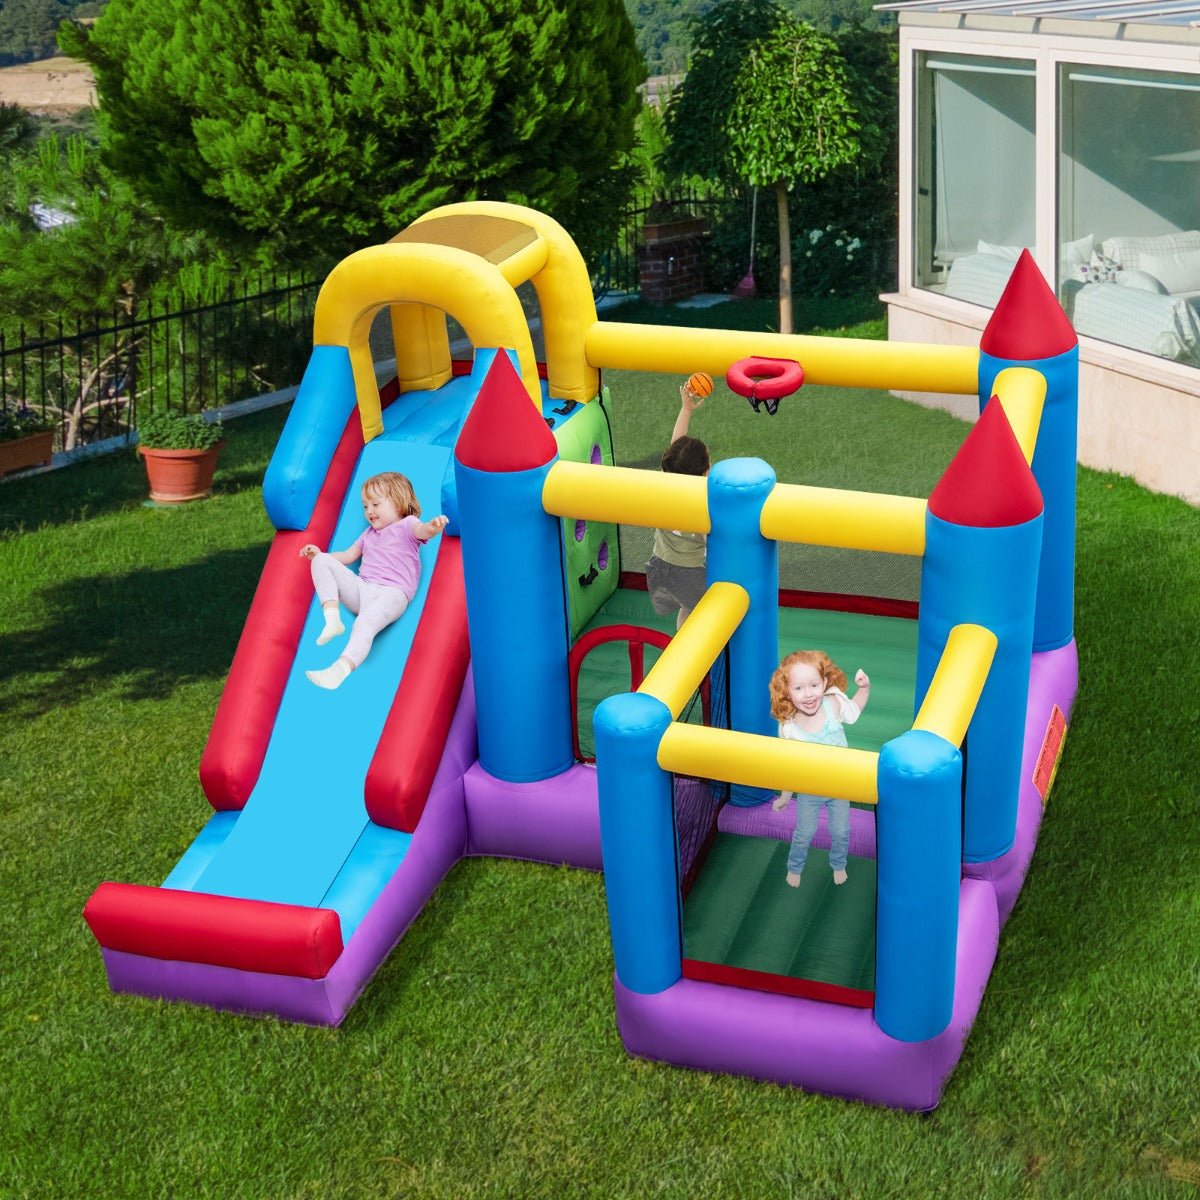 Kids Inflatable Playhouse with Slide, Trampoline & Fun Features (Including Blower)